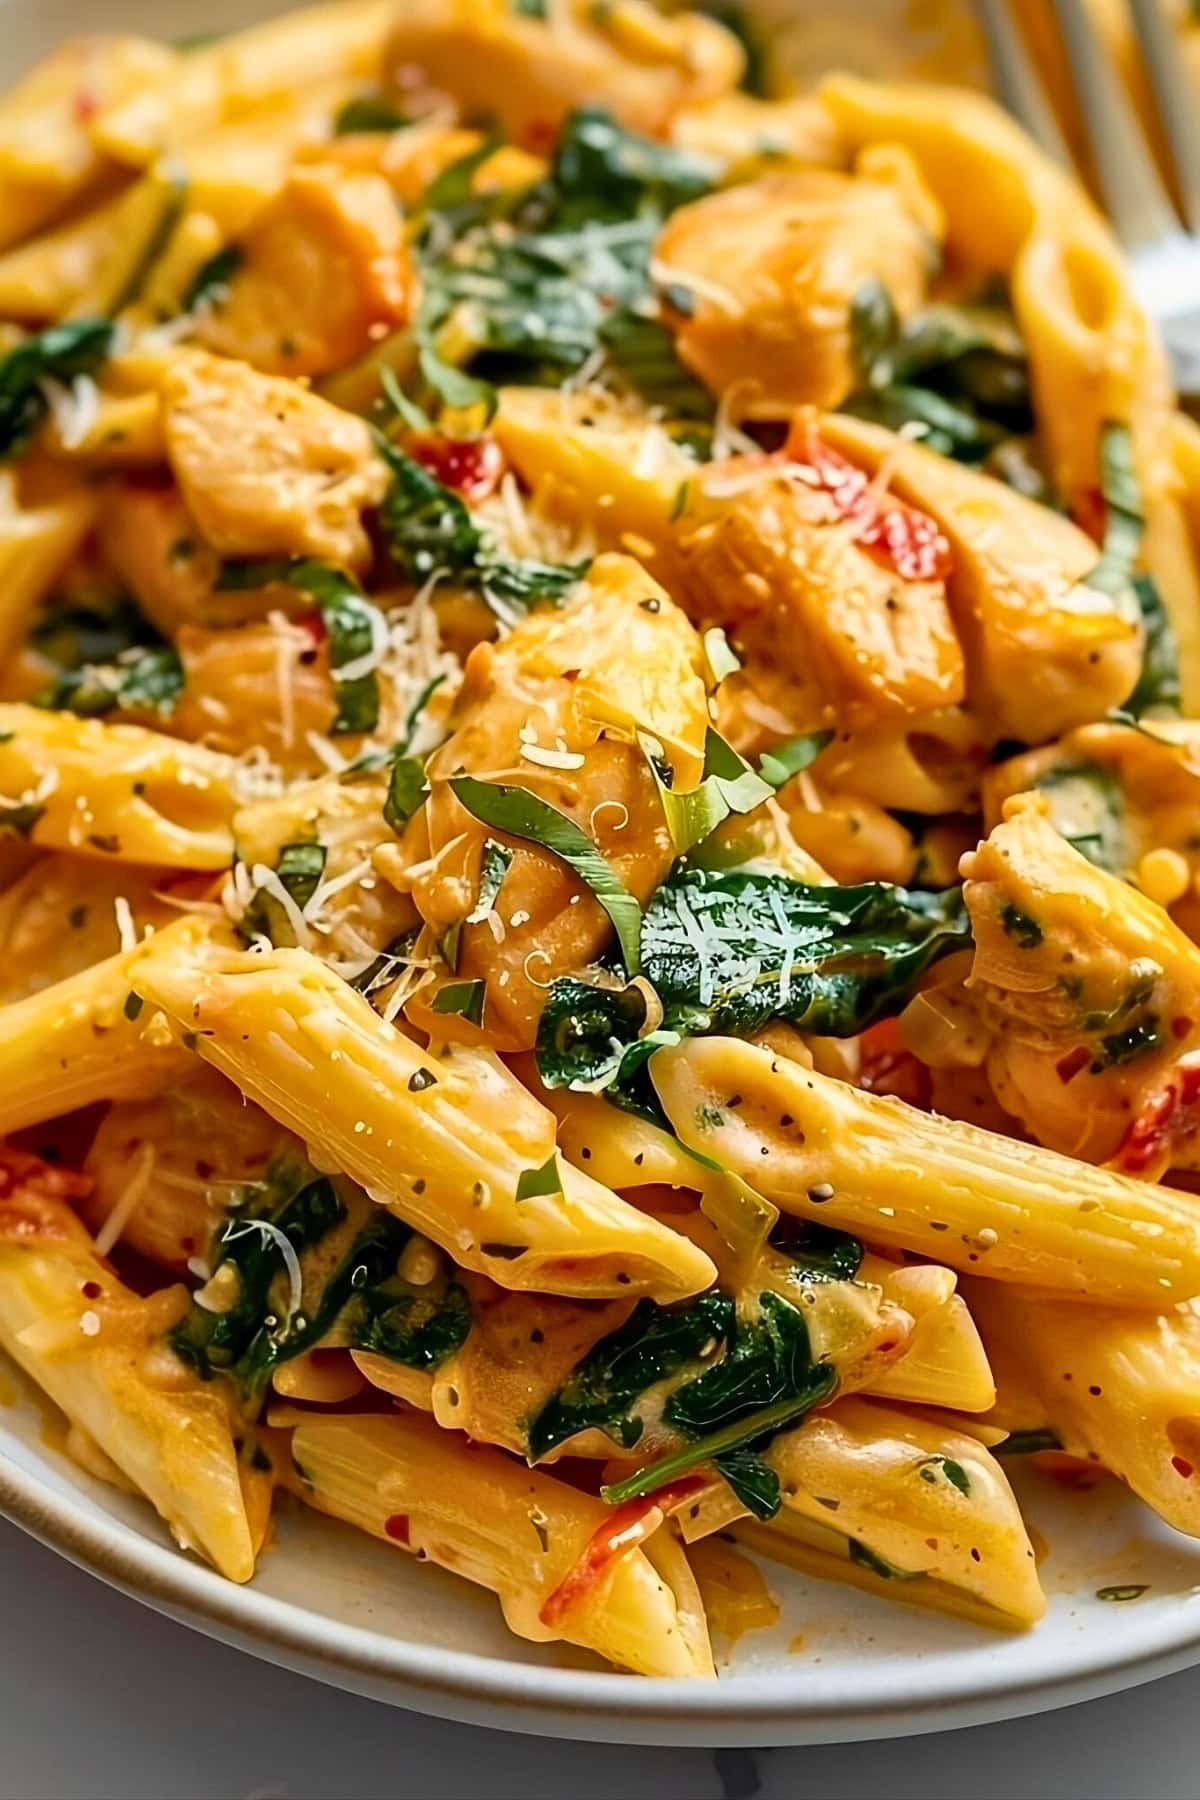 Cheesy and creamy serving of Tuscan chicken pasta with spinach.